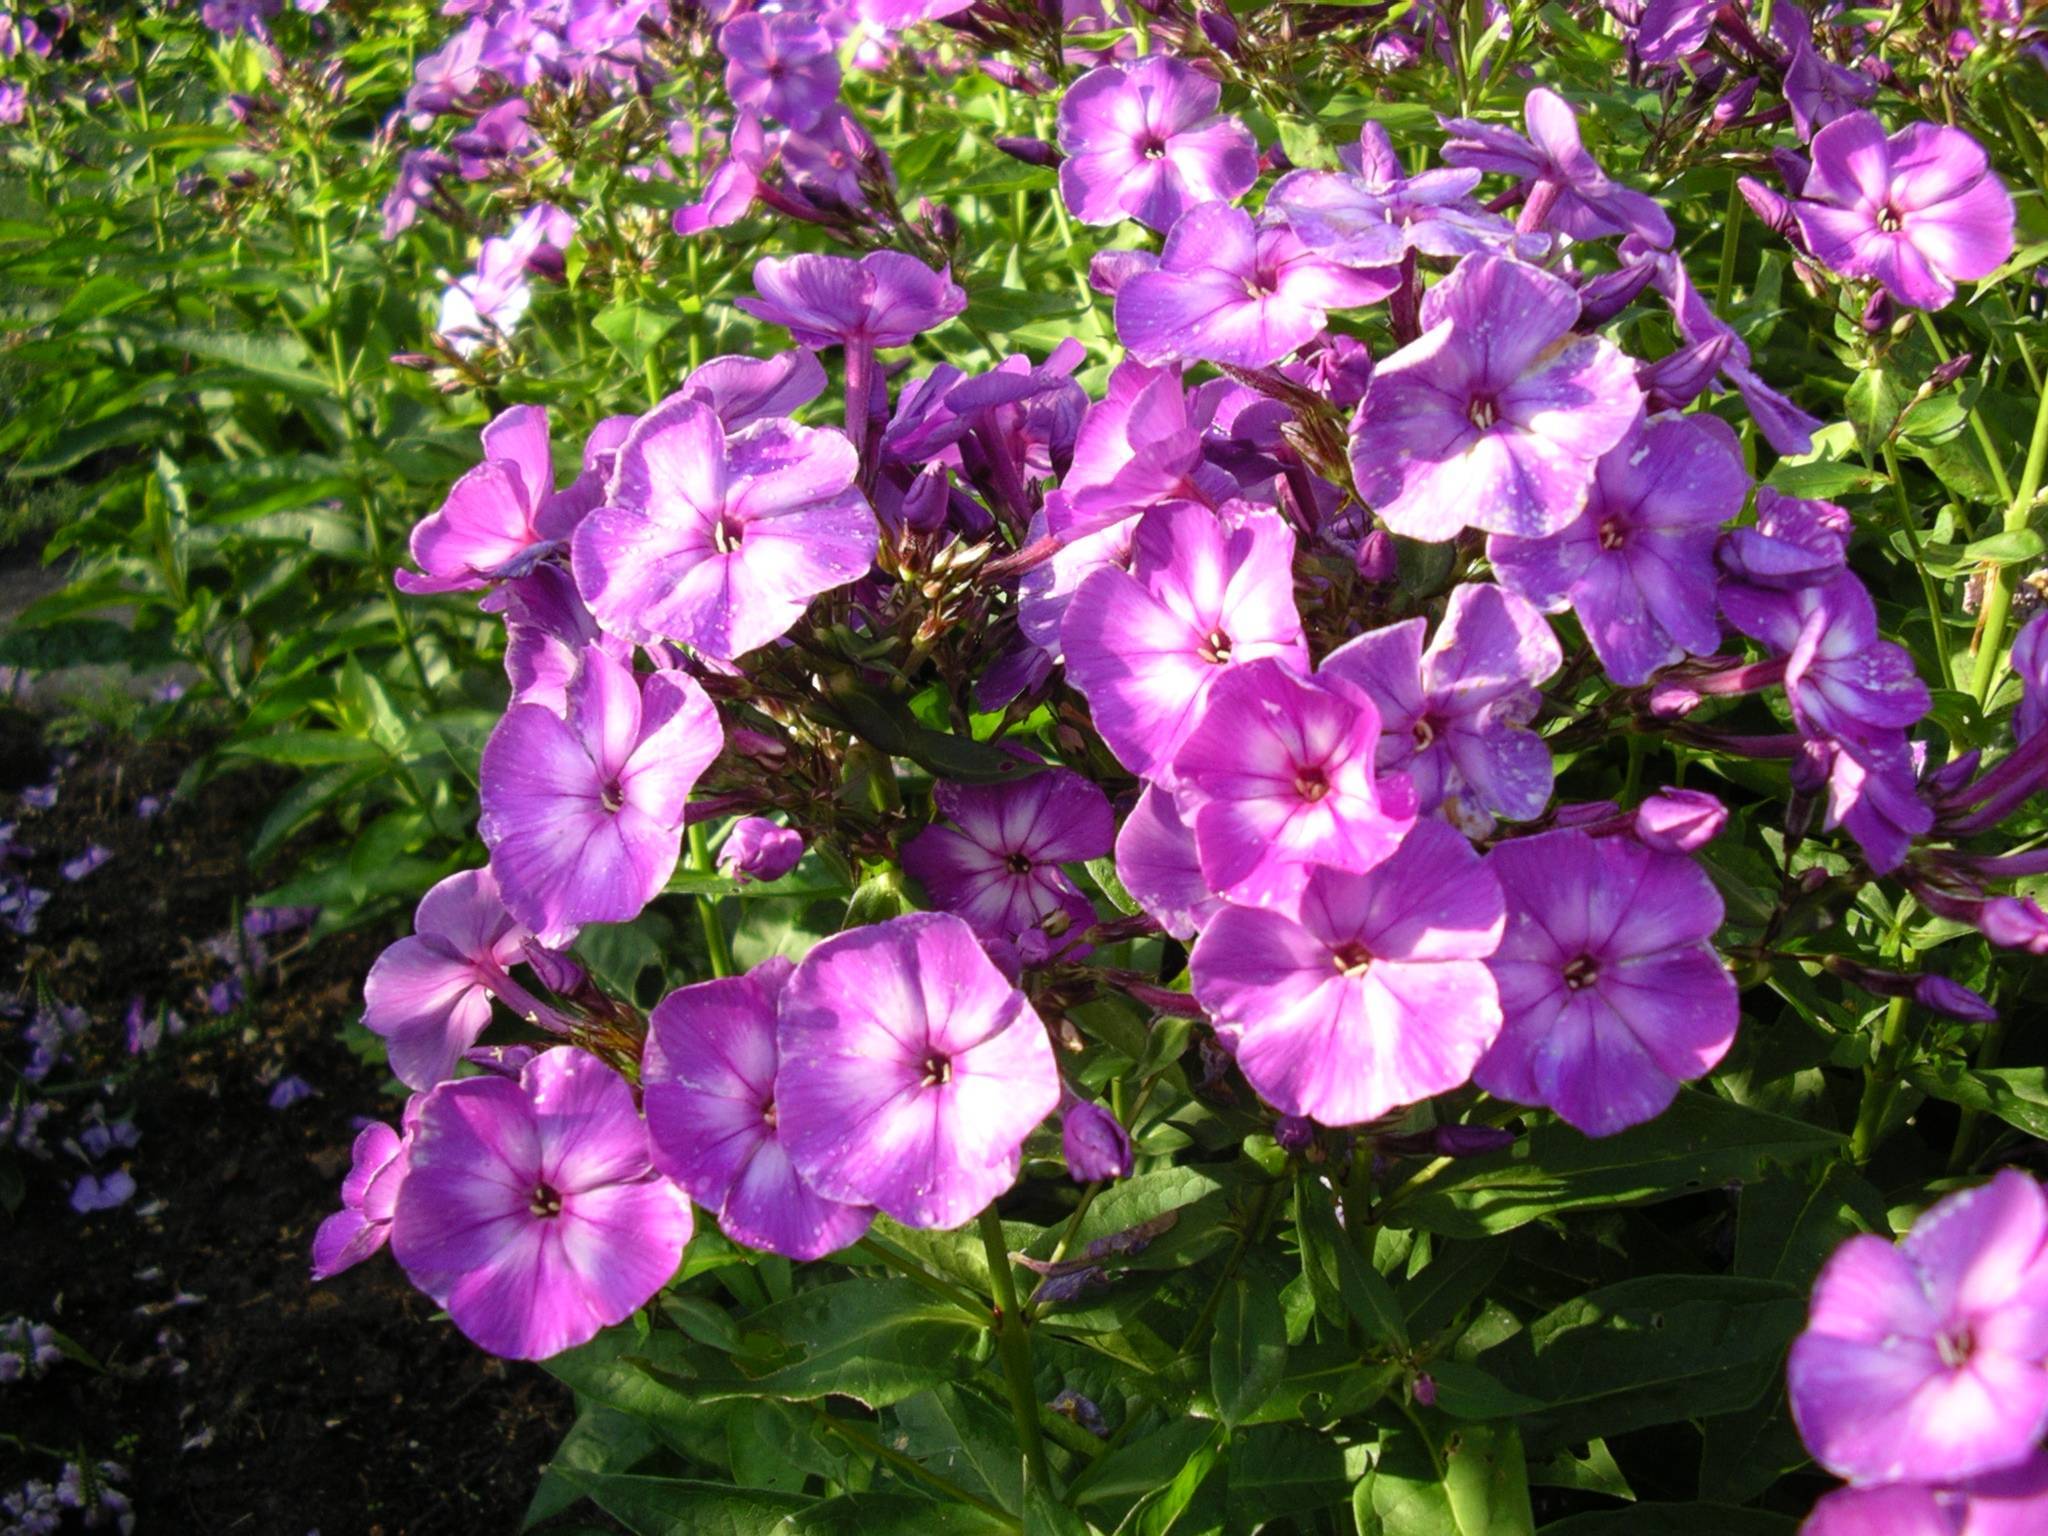 purple-white flowers with lime-green leaves and stems